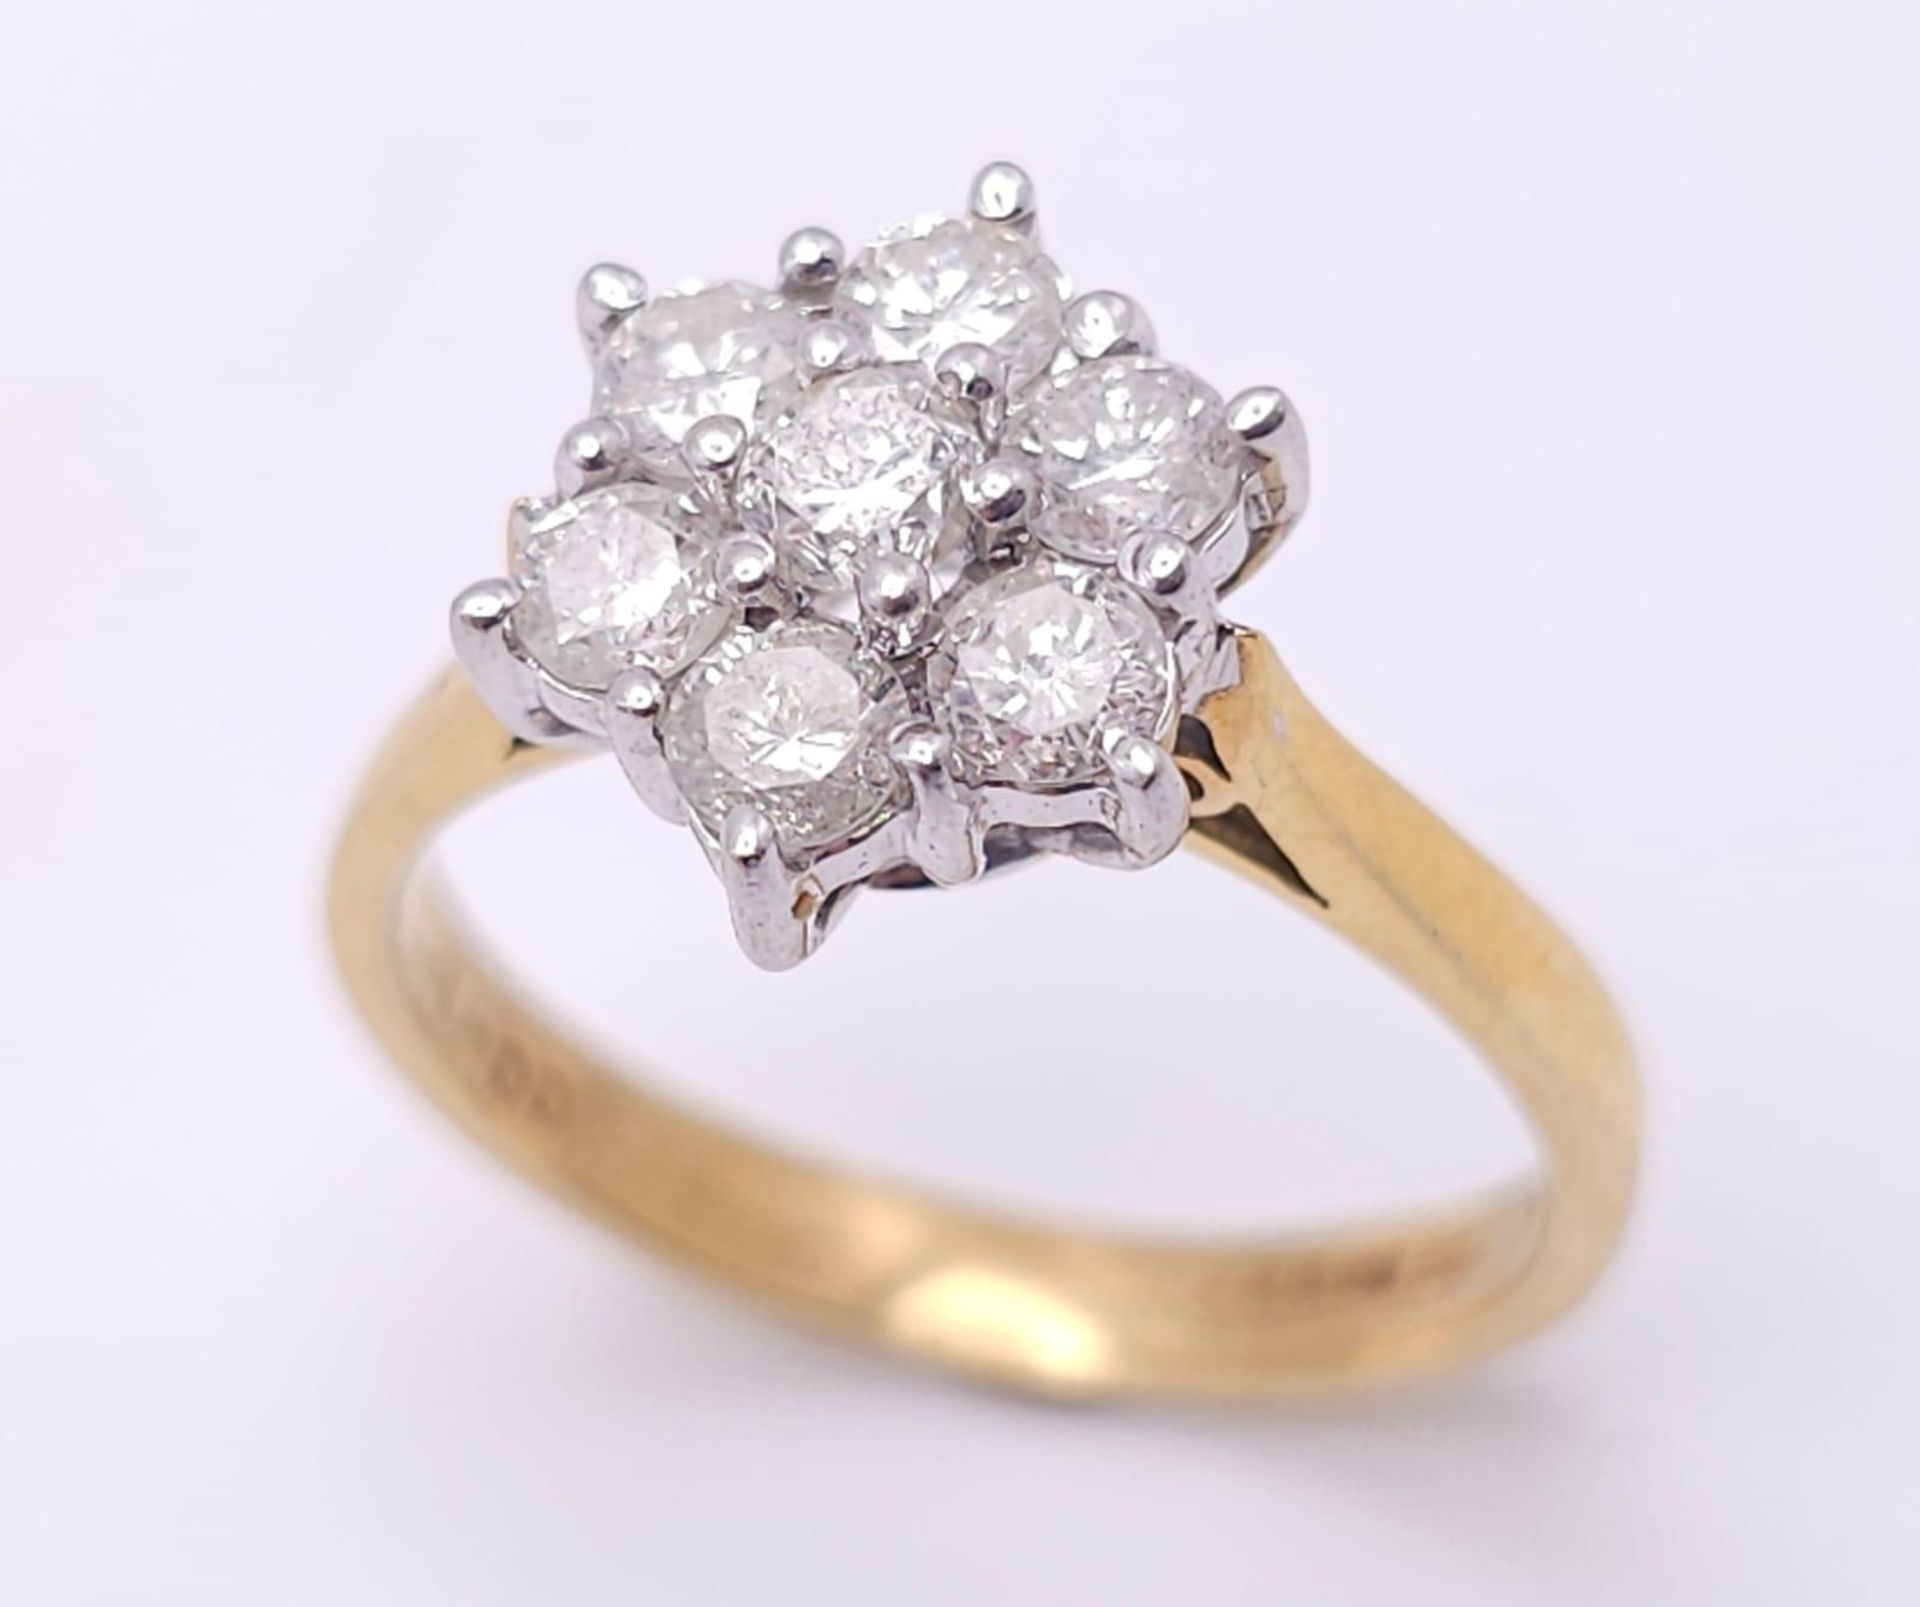 18K YELLOW GOLD DIAMOND CLUSTER RING WITH APPROX 1.05CT DIAMONDS IN FLORAL DESIGN, WEIGHT 4.6G